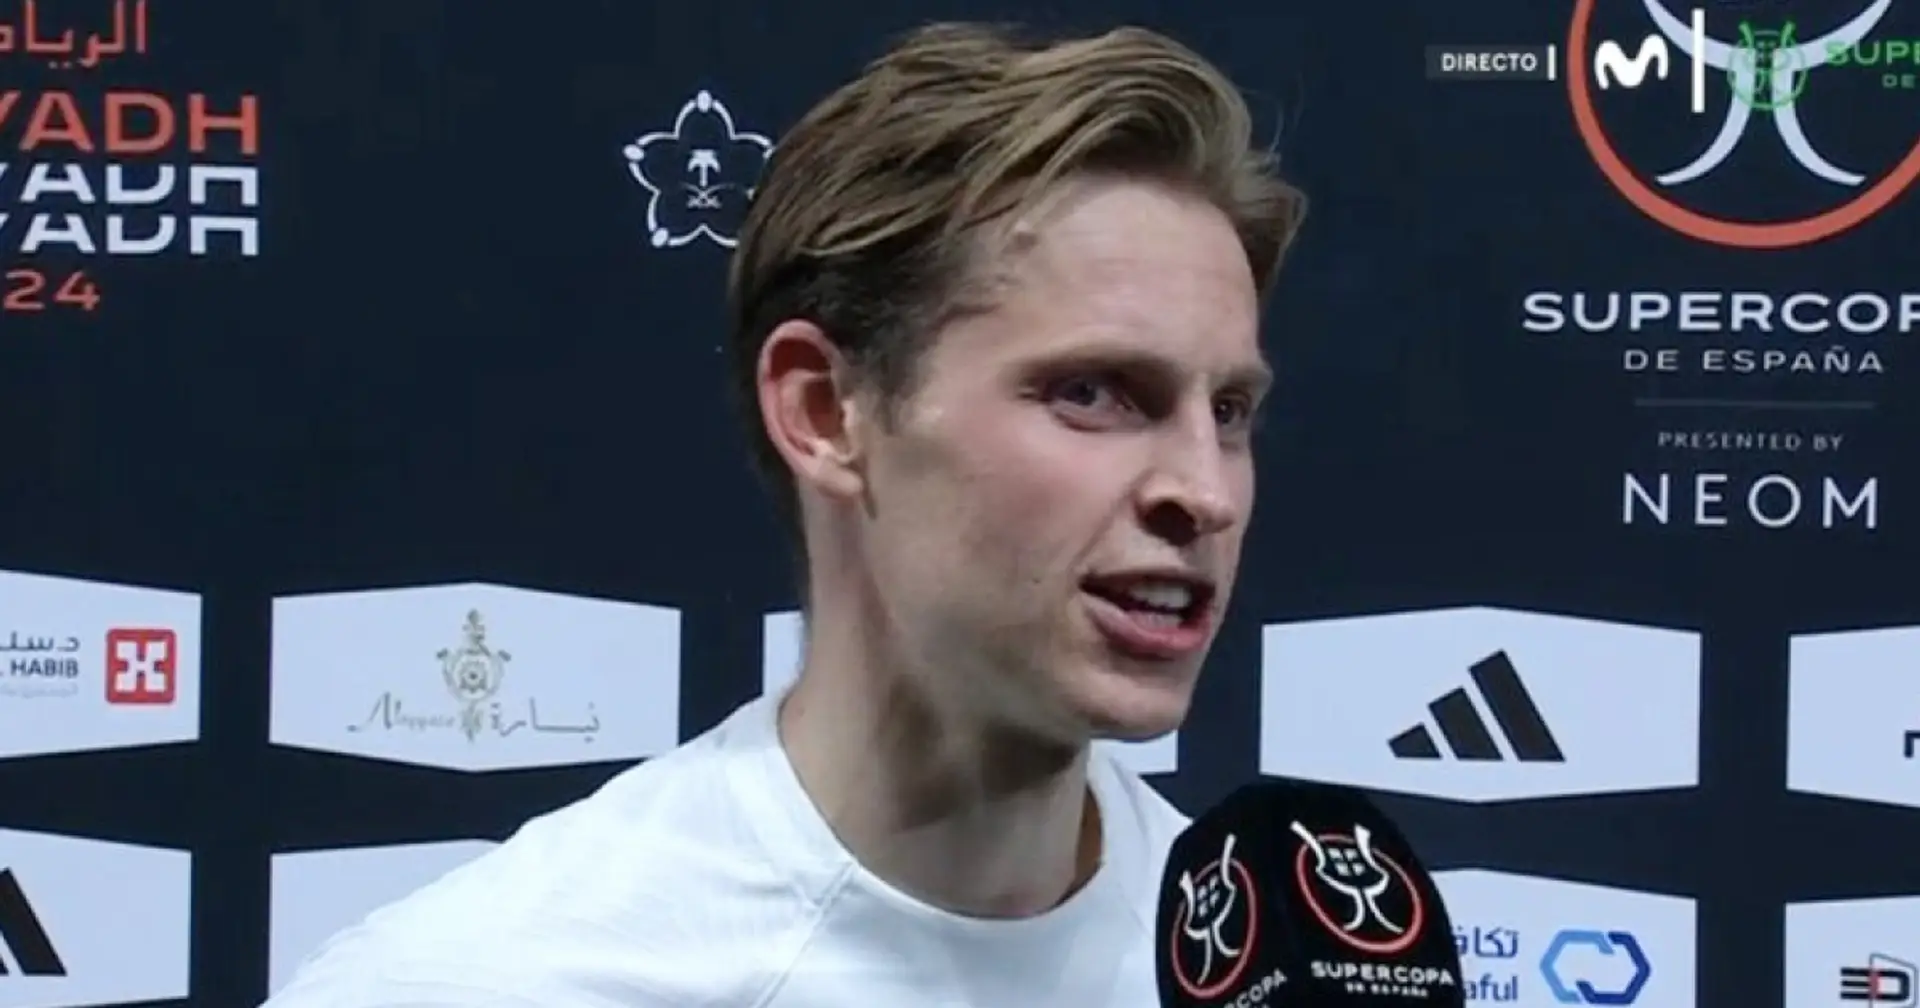 Will Frenkie De Jong really be fit for PSG game? 